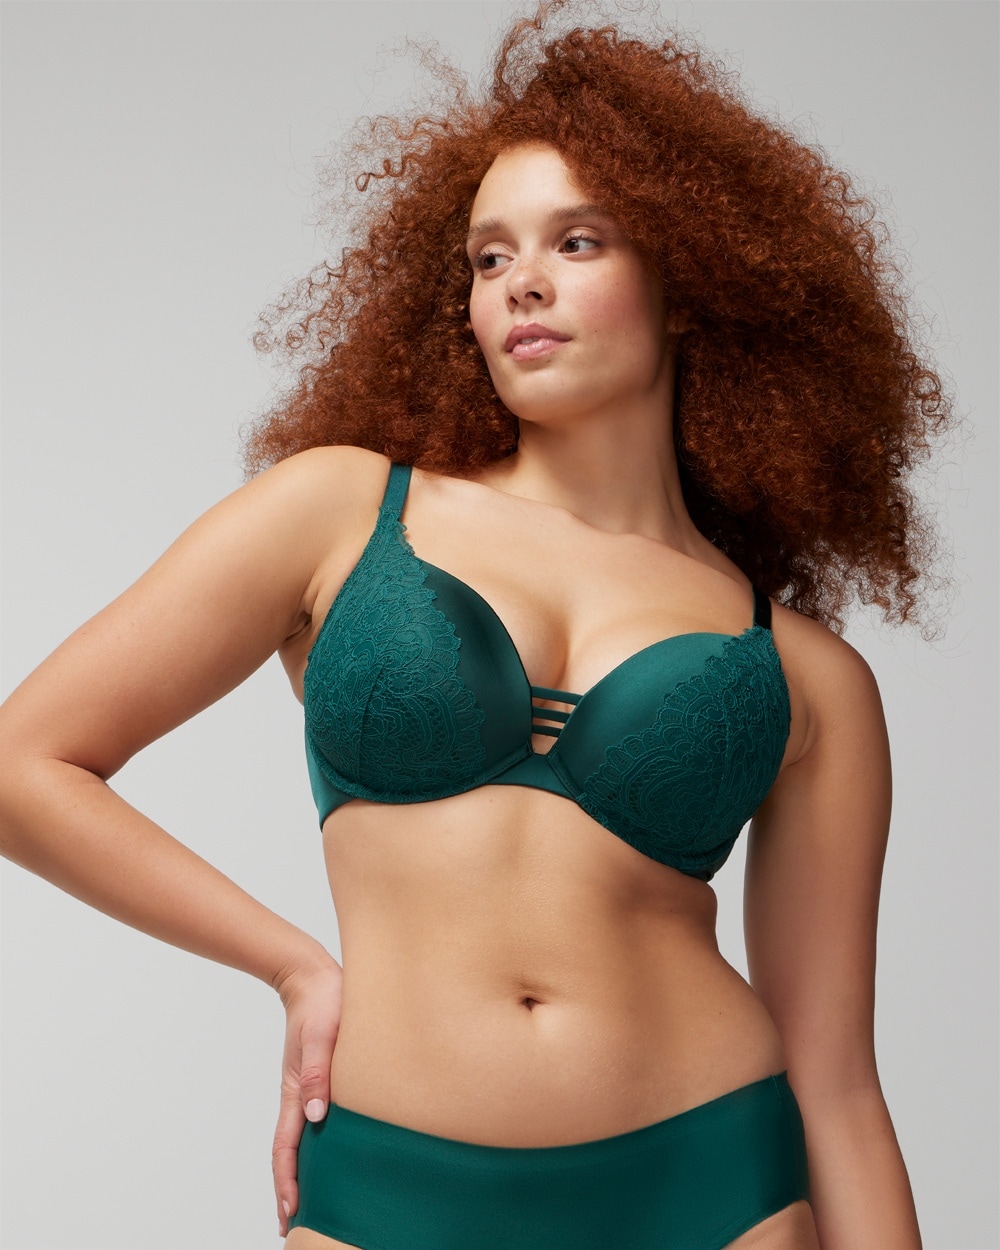 Women's Stunning Push-up Bra With Lace In Green Size 36ddd 